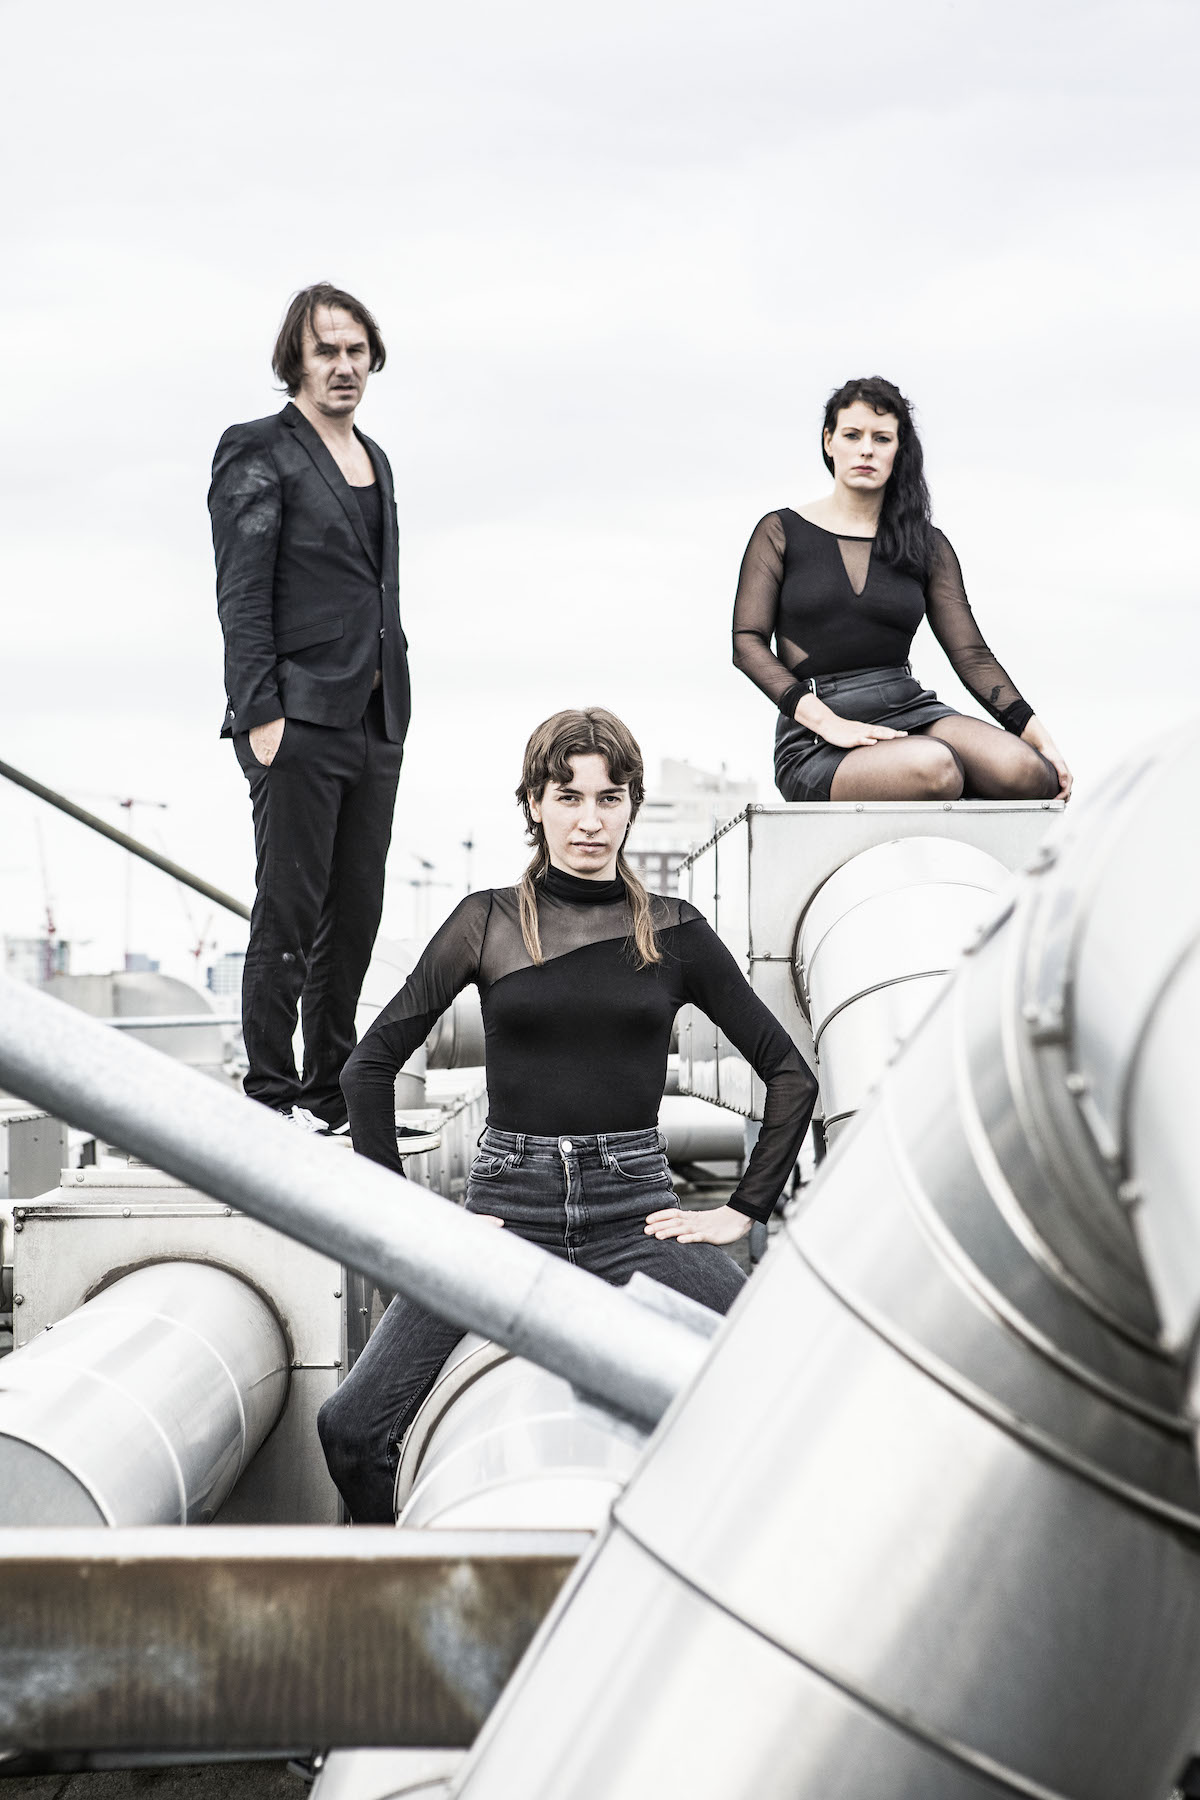 The band Gewalt poses on a flat roof with thick, chrome-coloured ventilation pipes. The sky is grey. Everyone is wearing black clothes, looking sternly into the camera, their faces appear pale. Singer and guitarist Patrick Wanger stands on the left side on a box connecting the pipes and has his hands in the pockets of his suit trousers. He wears a black T-shirt, and a black jacket with white chalk stains on the sleeve. His brown hair reaches below his earlobes. To his right, guitarist Helen Henfling kneels also on a box, in a skin-tight short dress with see-through long sleeves. Her long black hair rests on her left shoulder. Between the two and further front, bassist Jasmin Rilke is sitting wide-legged on a vent pipe. She wears black jeans, a high-necked, long-sleeved top with one shoulder and one arm transparent. Her dark blonde hair is short, only two thick strands are visible at the back of her head, each draped forward over her shoulder. Her hands are each resting on her thighs, her elbows pointing outwards.